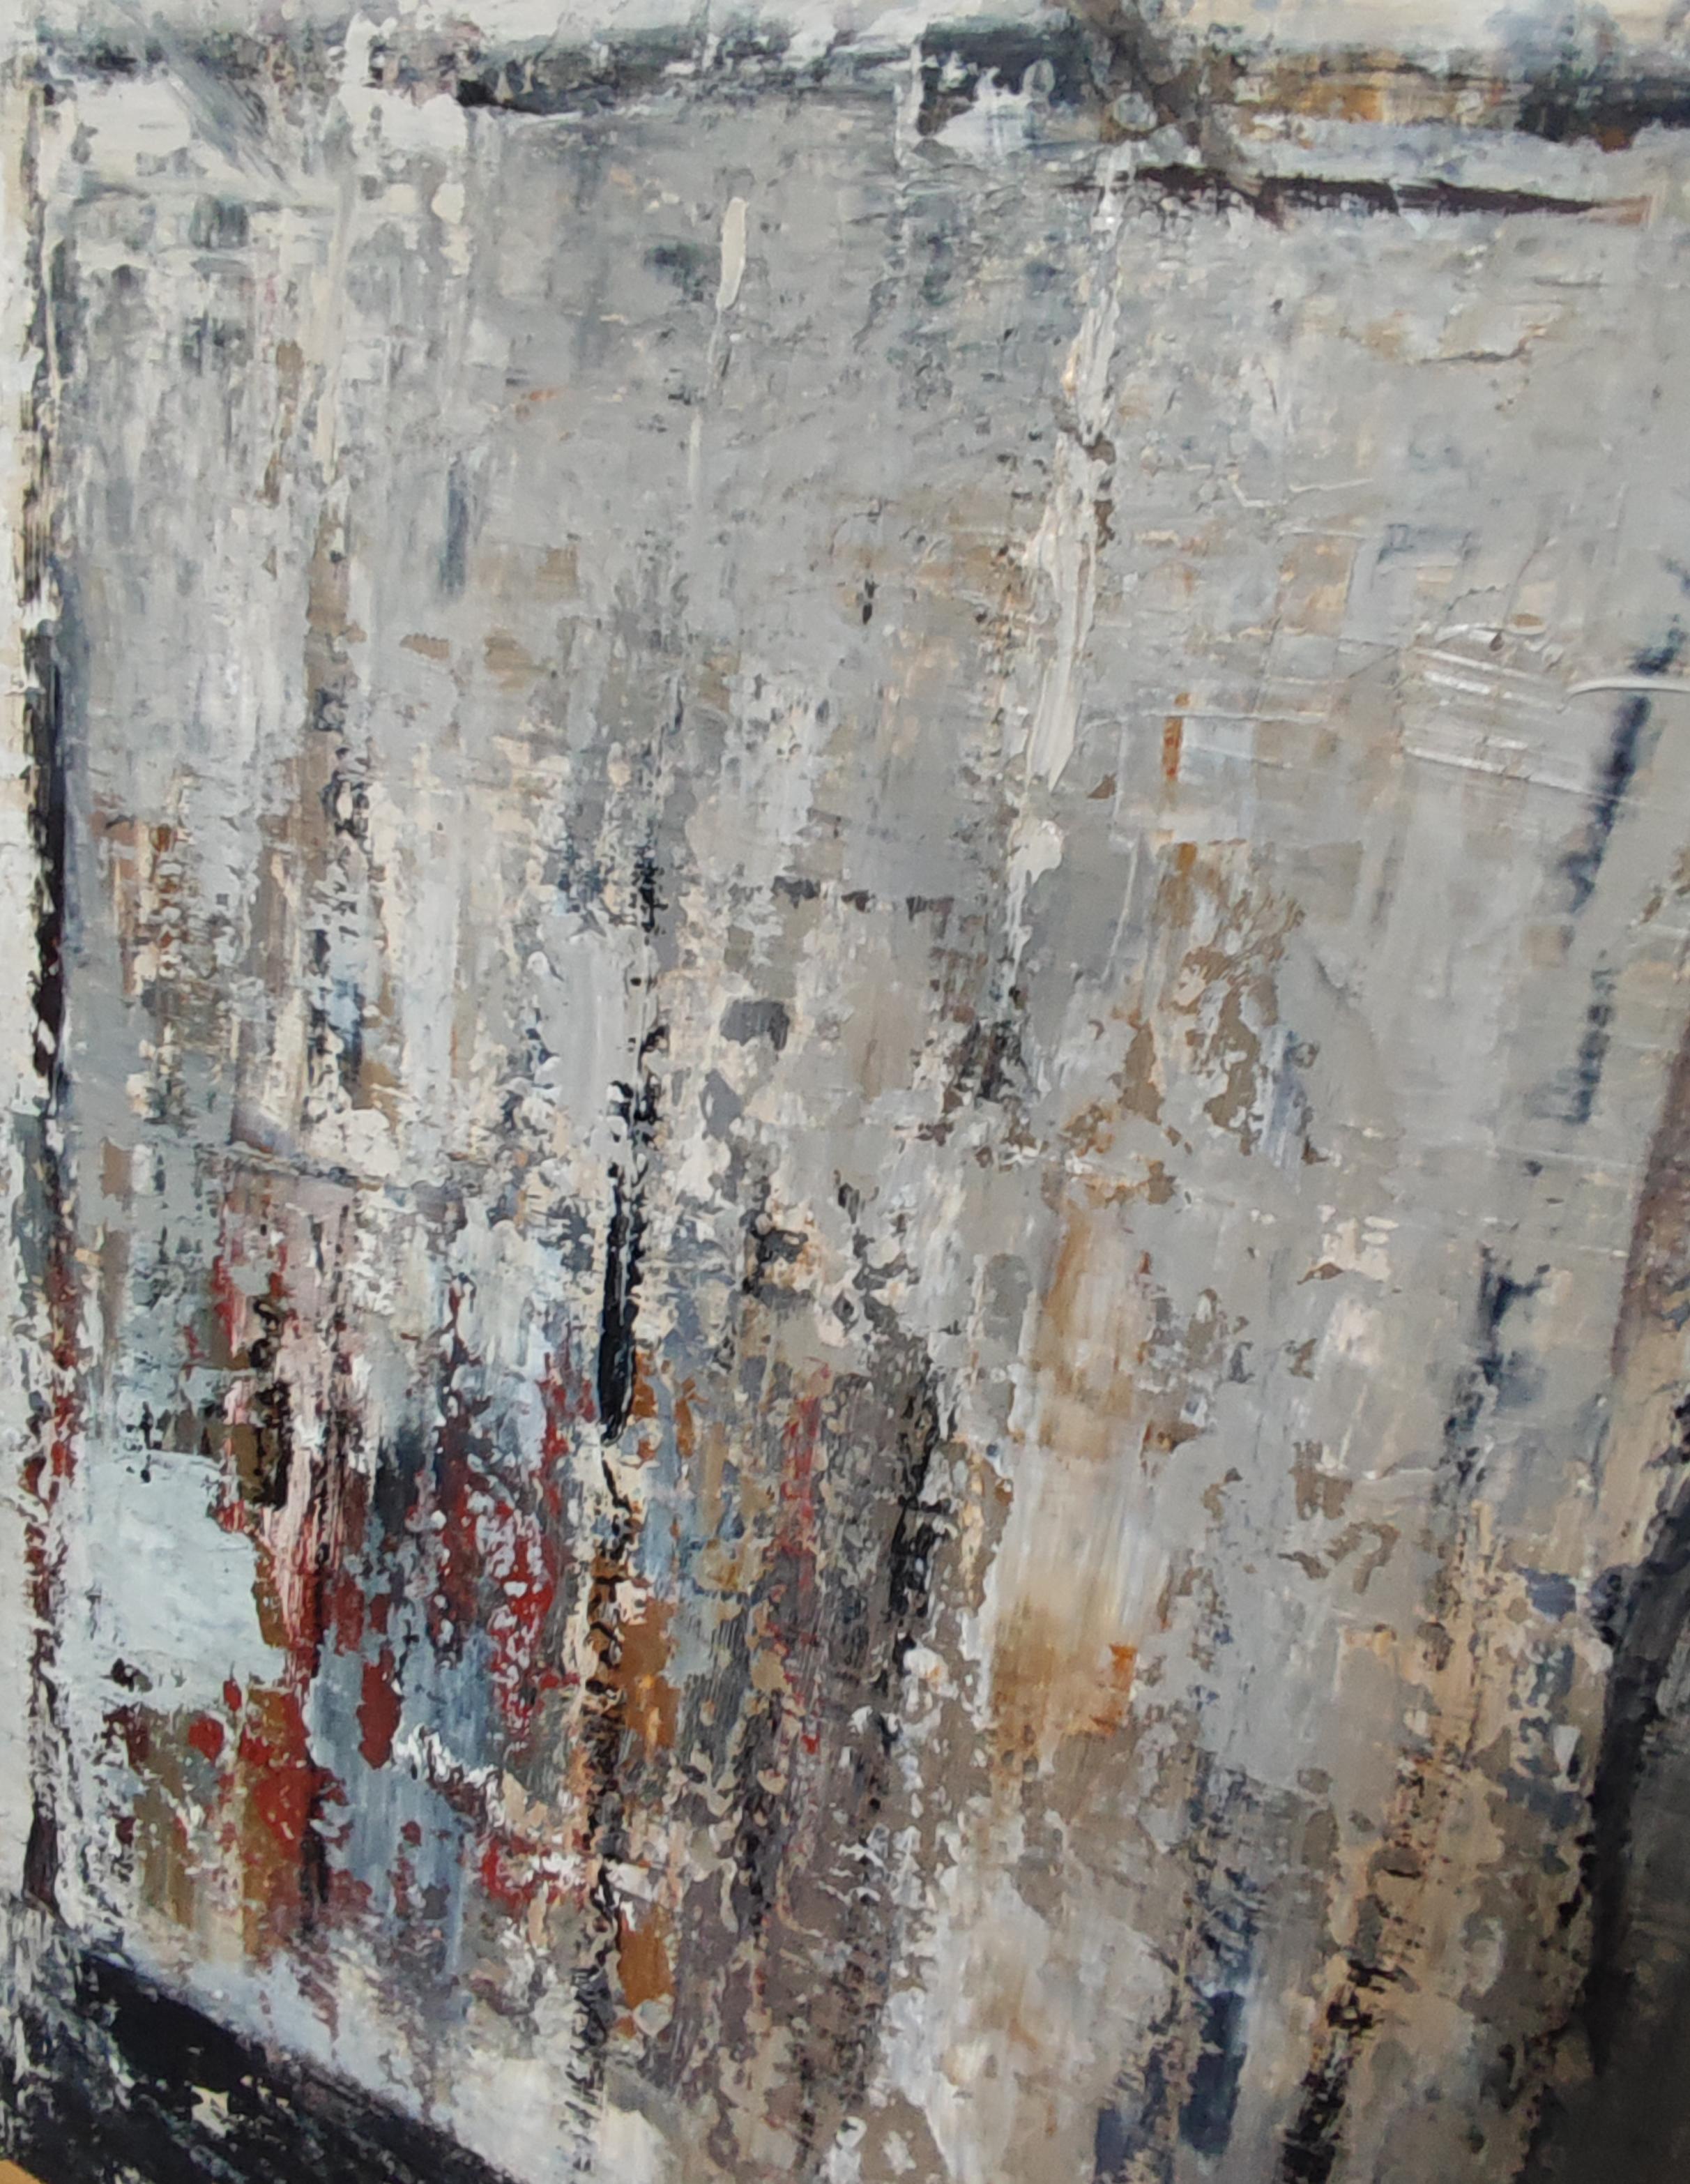 abstract painting having as starting subject an old painted door. The variations of black, gray and white concentrate all the energy contained in the wood, in the paint which peels off over time. The layers are numerous revealing the underlying